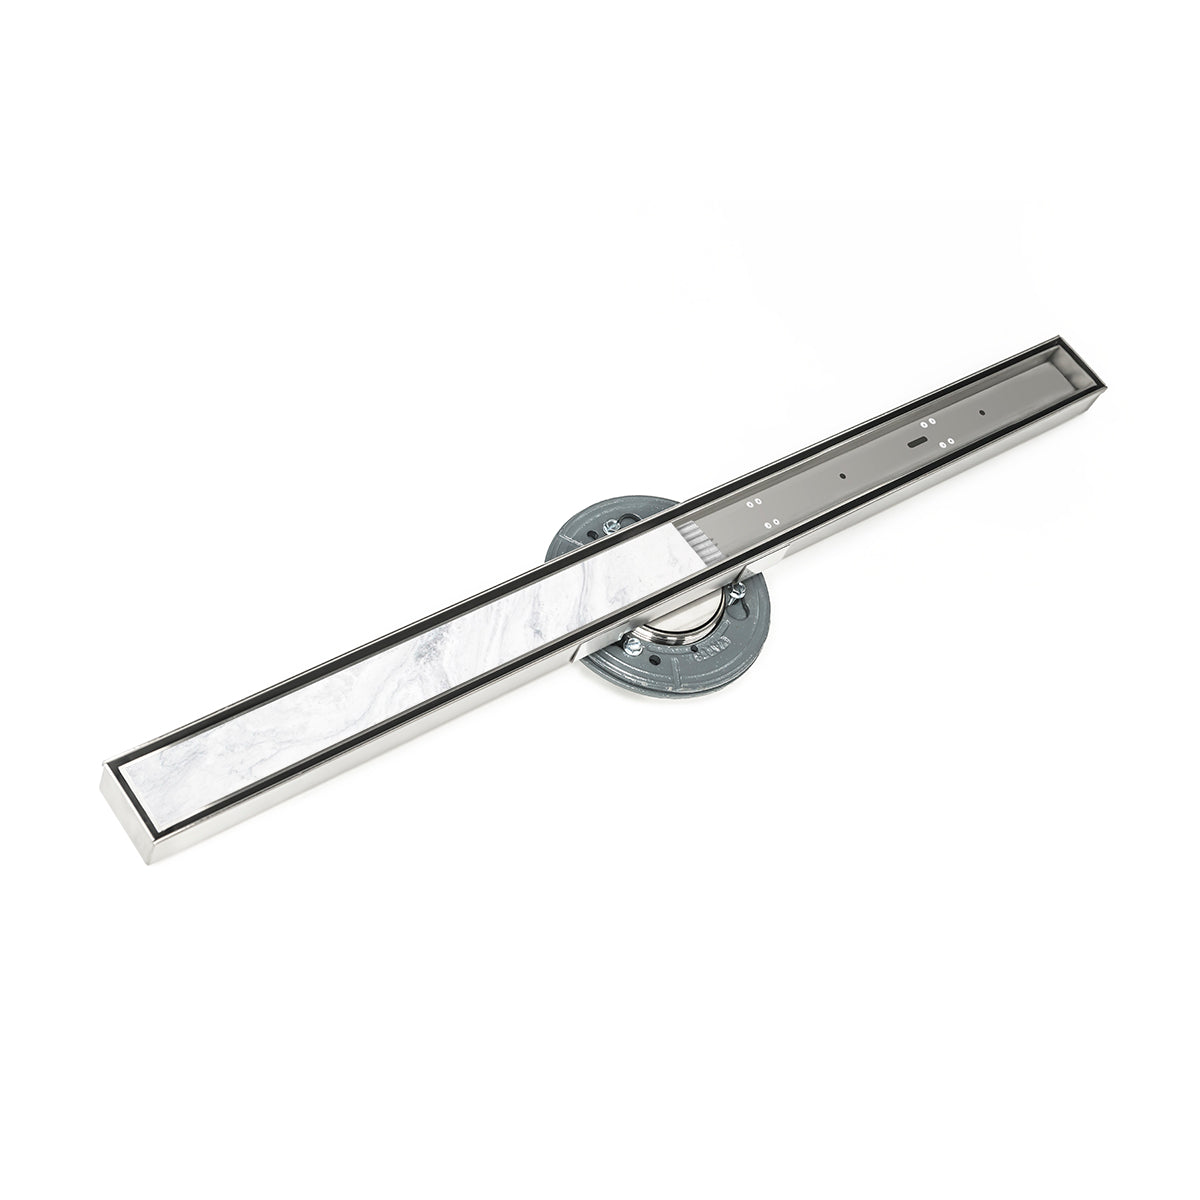 Infinity Drain 48" S-Stainless Steel Series High Flow Site Sizable Linear Drain Kit with Tile Insert Frame with Cast Iron Drain Body, 3" No Hub Outlet